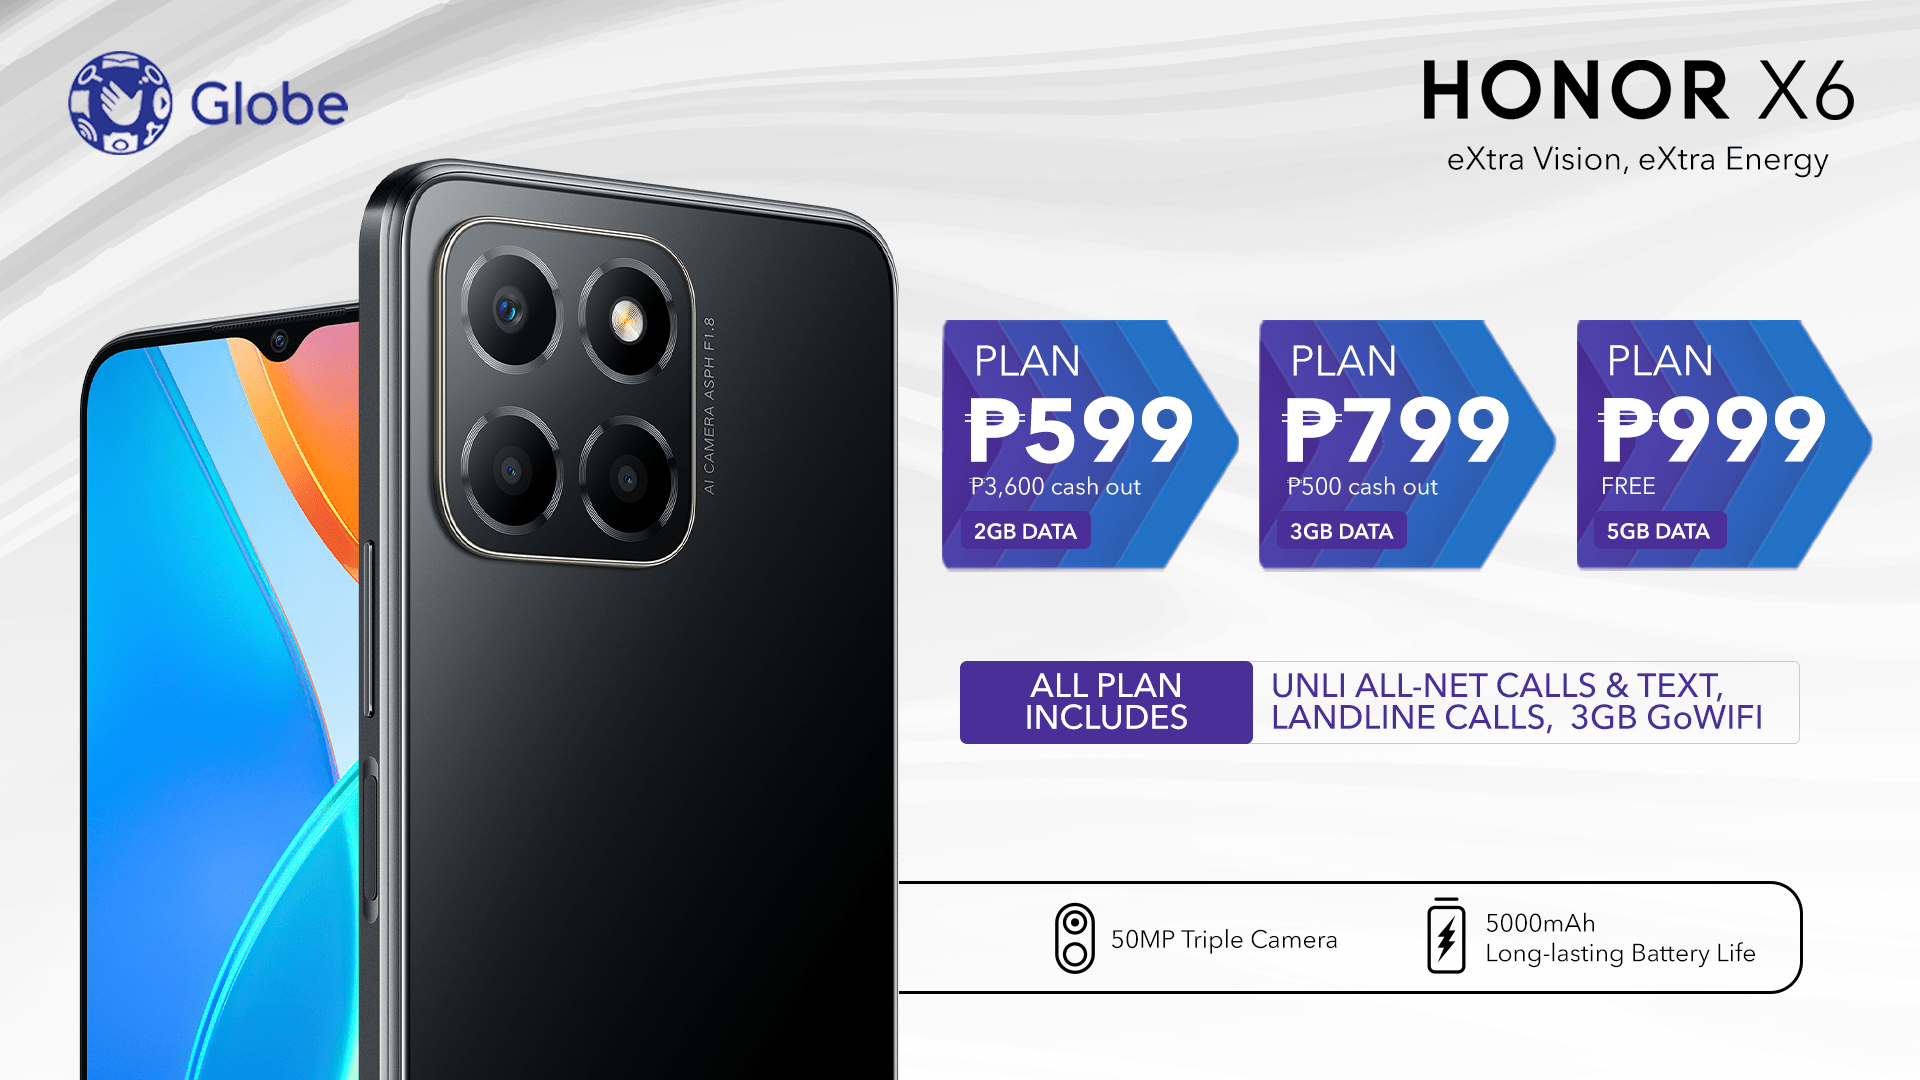 The HONOR X6 is now available via Globe's postpaid plans